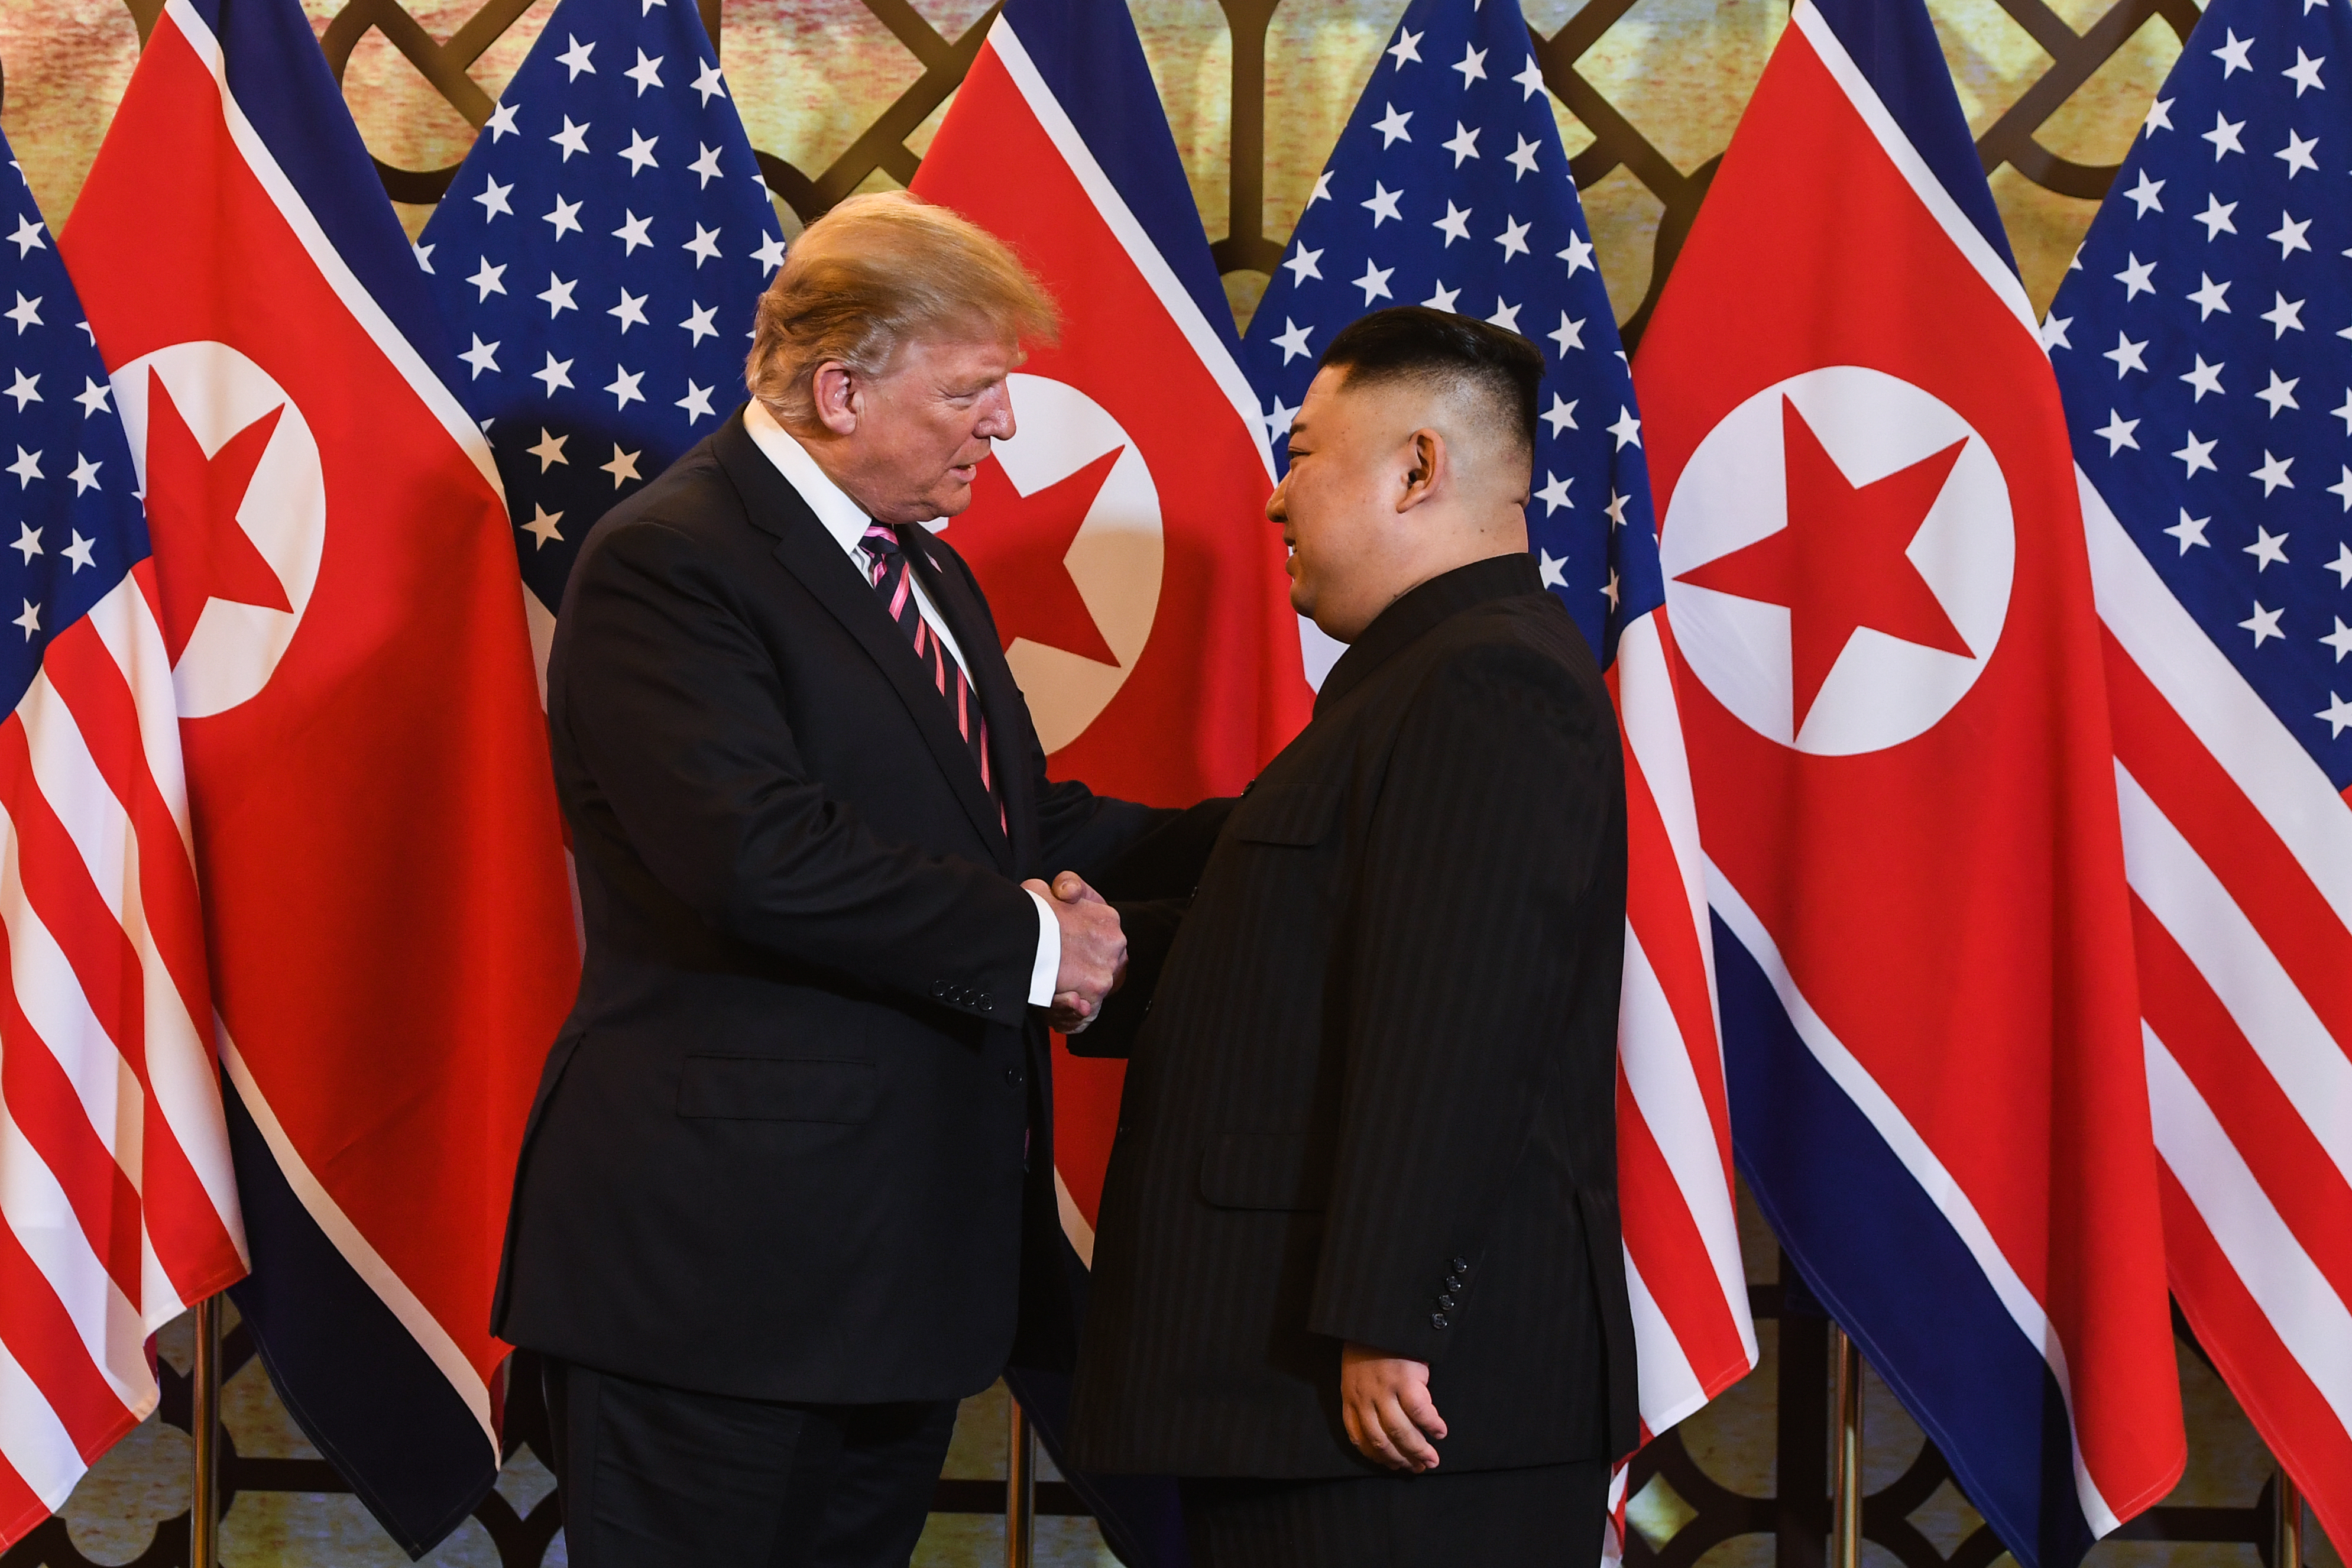 Here’s how Trump and Kim, and other DPRK officials, spoke about each other publicly over the years